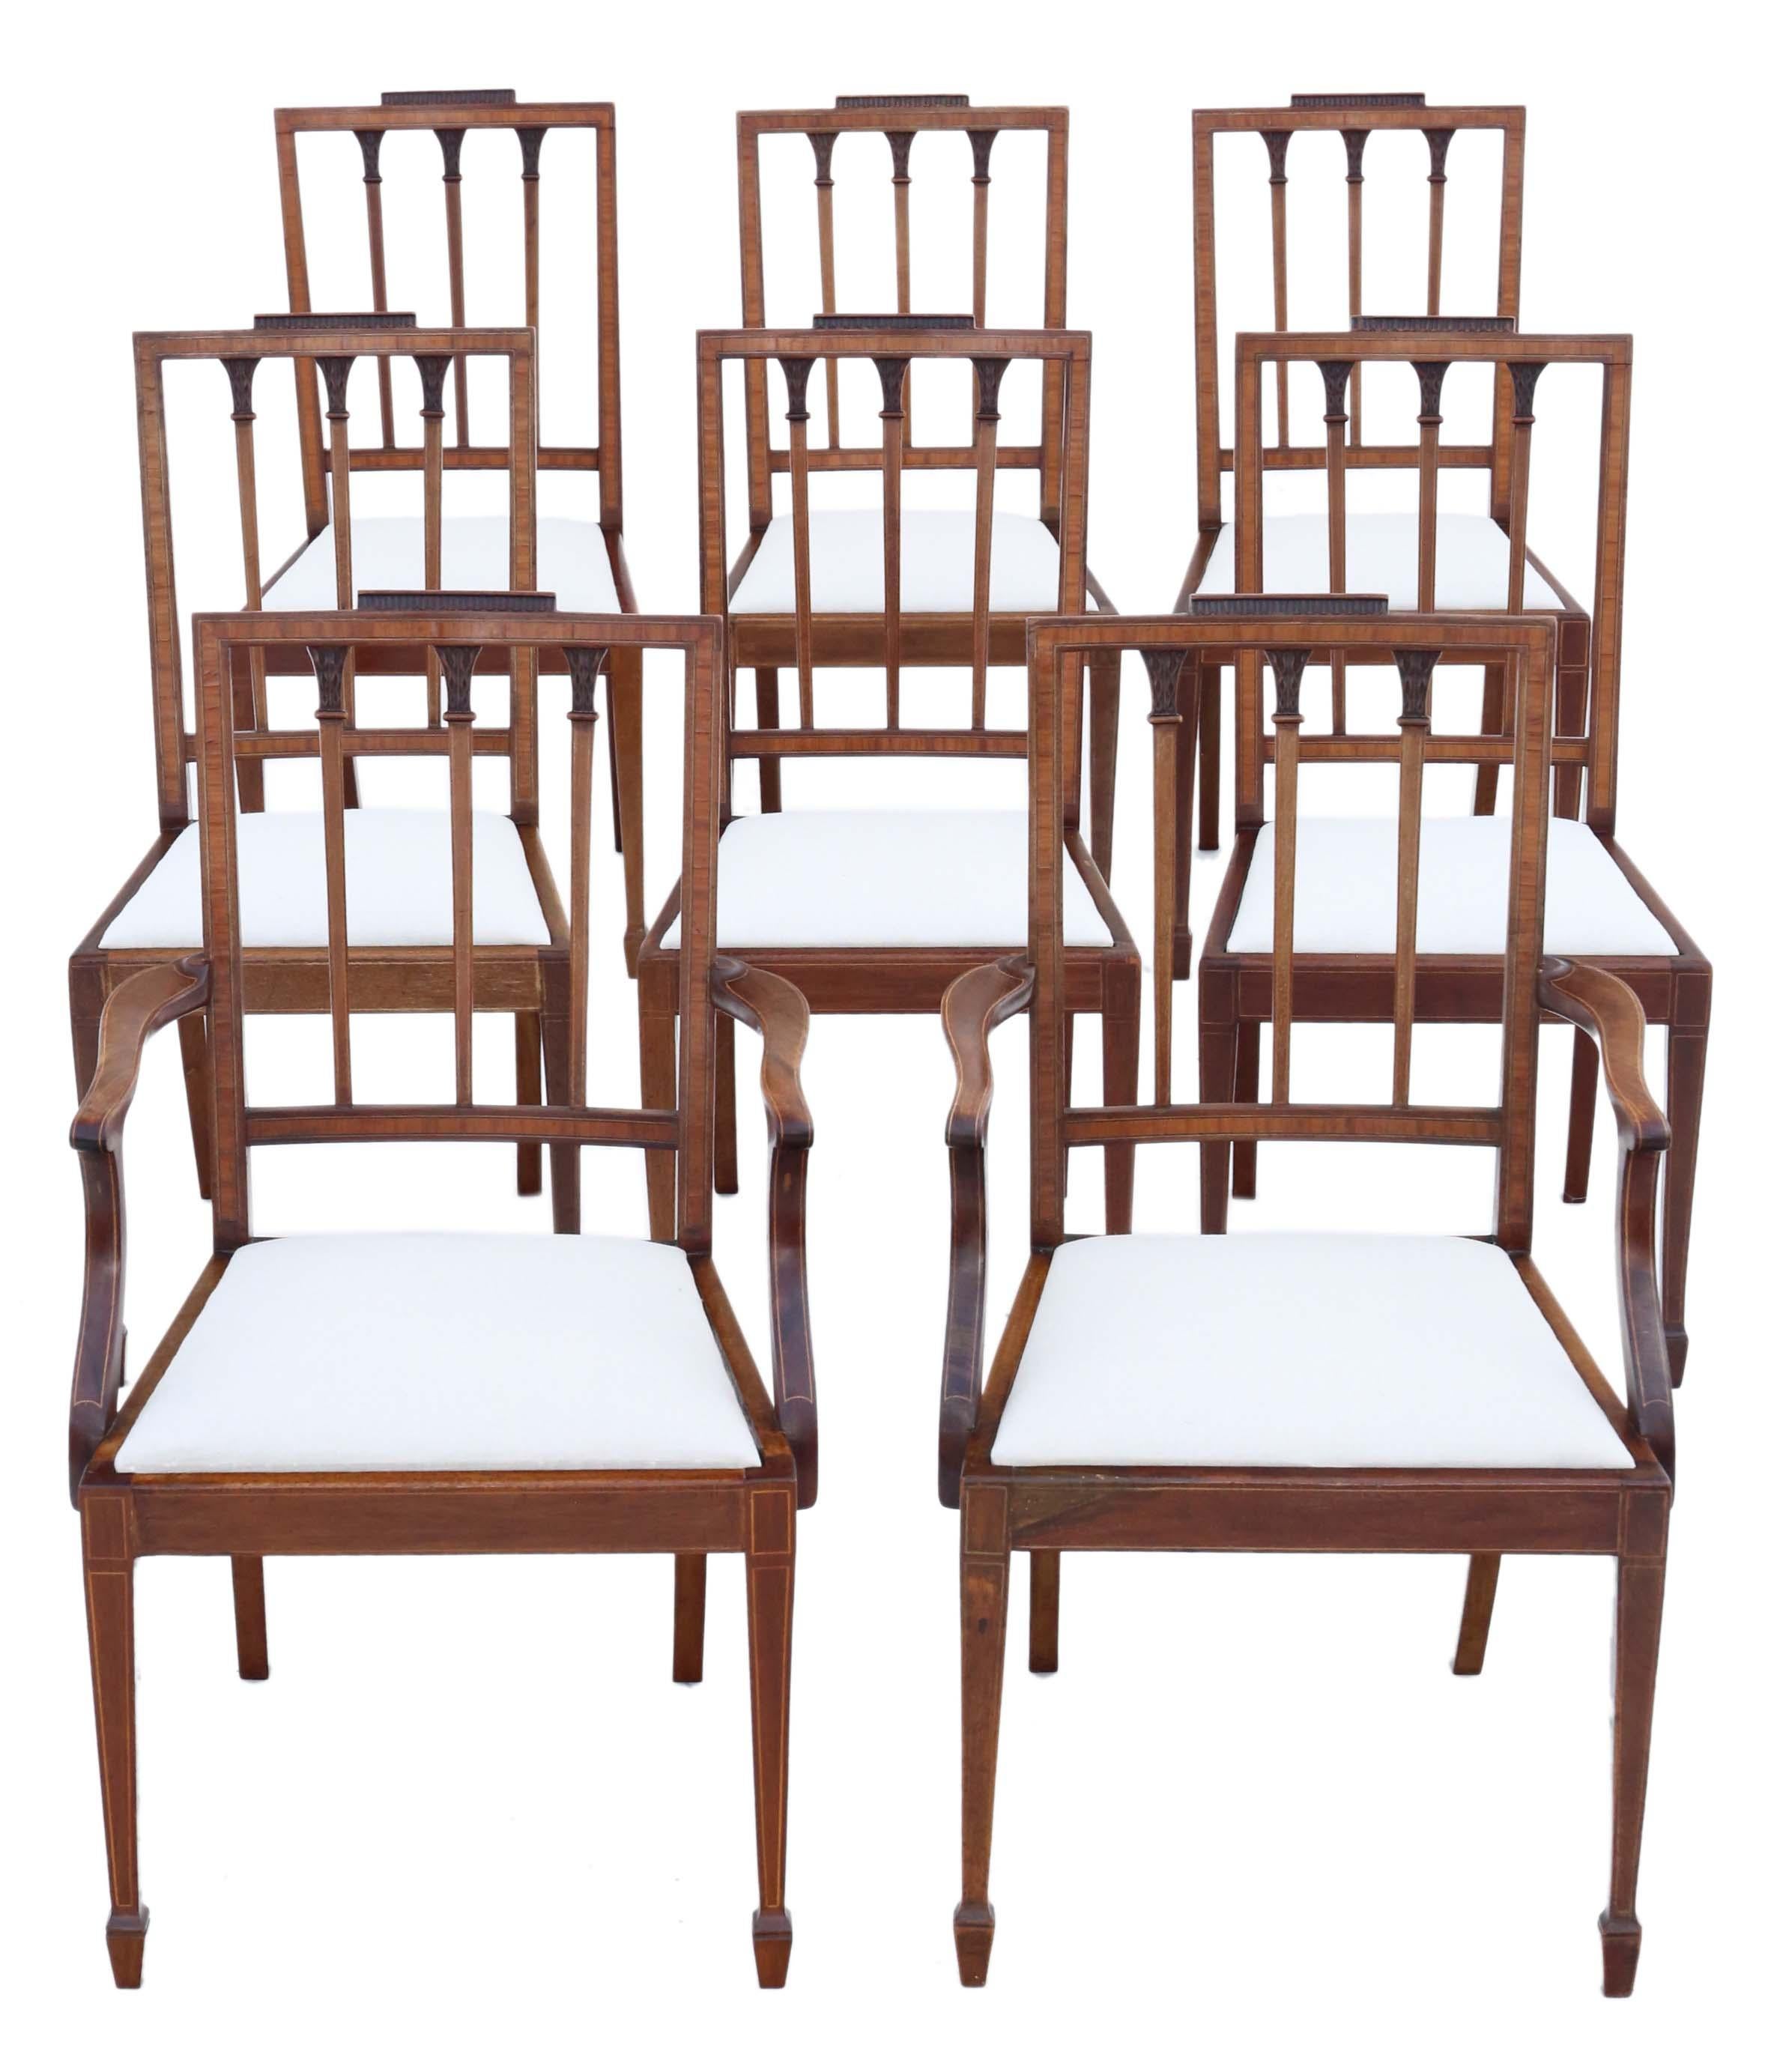 Georgian Revival Mahogany Dining Chairs: Set of 8 (6 + 2), Antique Quality, C190 For Sale 7